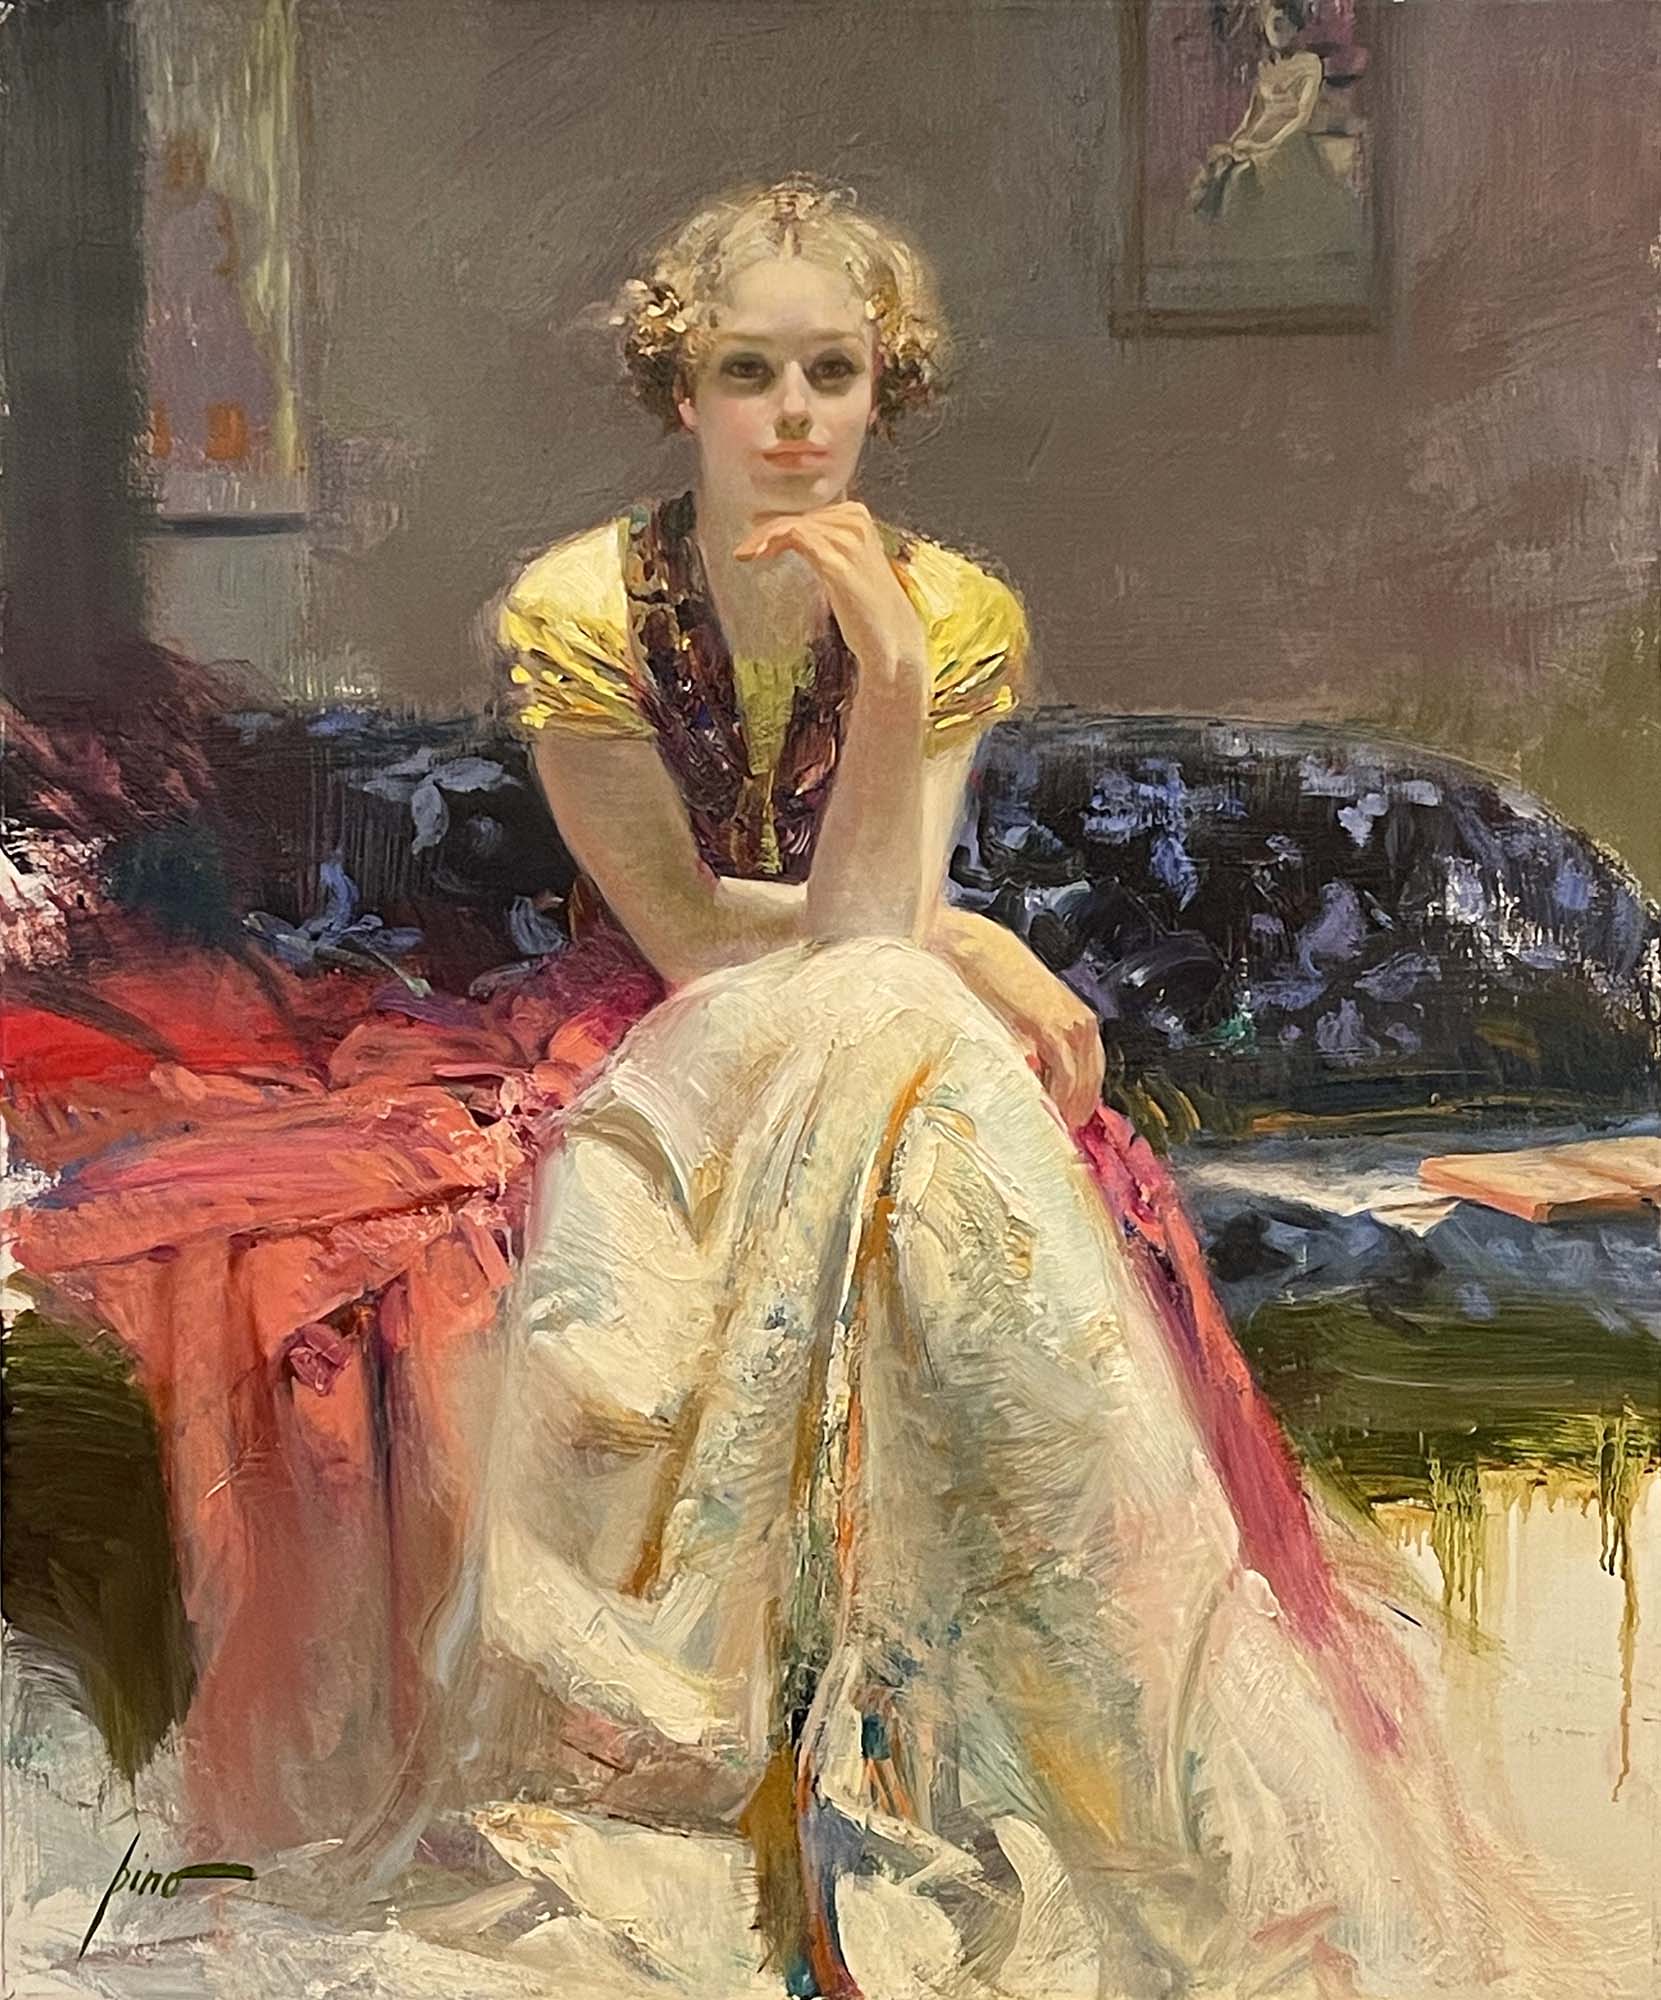 Old masters. Title: Enchantment, Oil on canvas, 36x30 in by old master Pino Daeni.